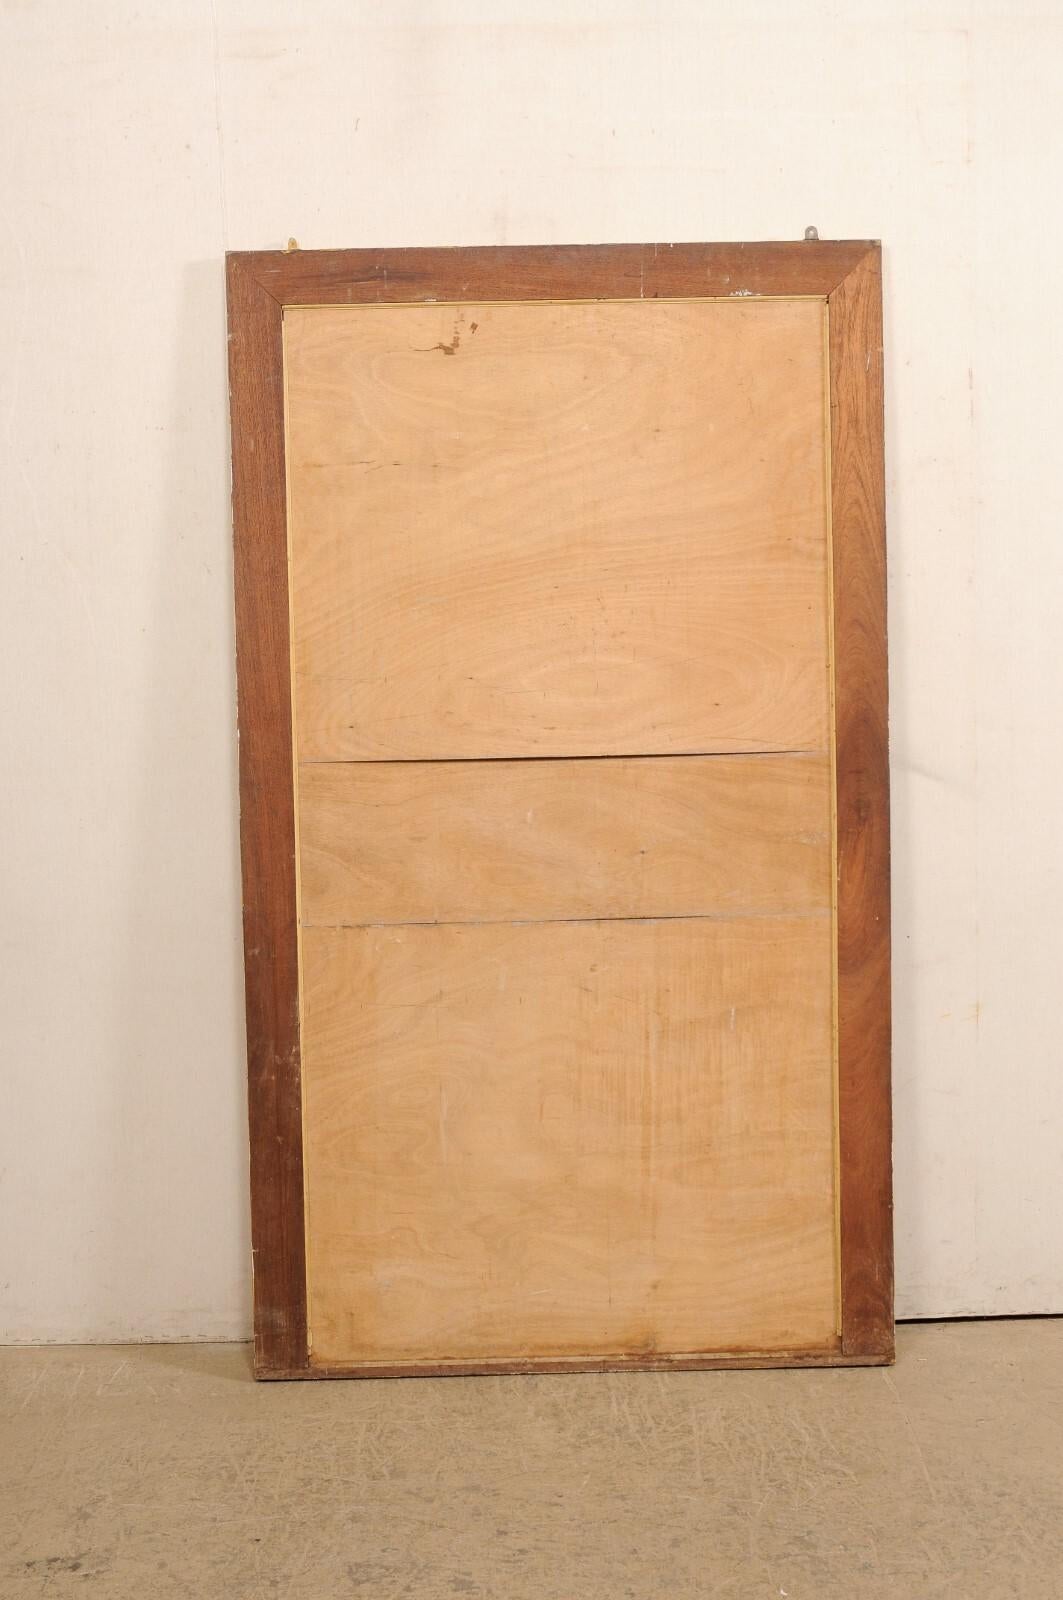 Italian 7 Ft Tall  Wall Mirror w/Painted Wood Surround & Clean Lines, 19th C. For Sale 4